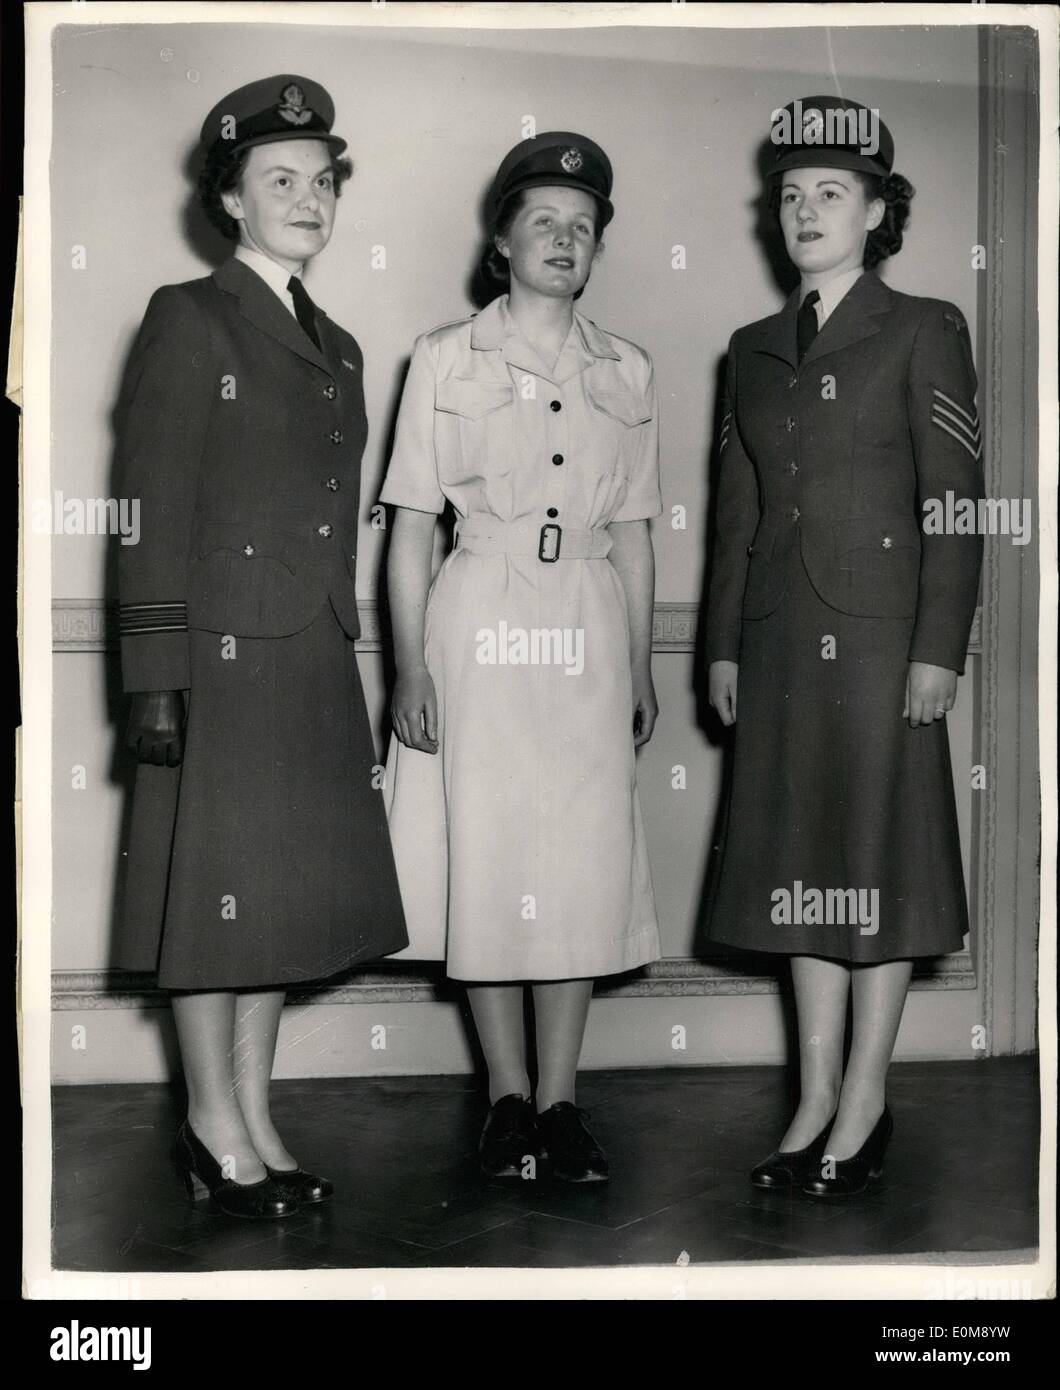 Feb. 02, 1954 - New W.R.A.F. Uniform for Home and Overseas: New designs for No. 1 Home Dress uniforms for both officers and airwomen of the Women's Royal Air Force have now been approved and a new tropical dress has been designed for wear by all ranks in tropical climates. The design of the present No. 1 Dress for officers and airwoman of the W.R.A.F. is, with the exception of the skirt based on the service dress of the R.A.F. The new uniforms have been designed by Mr Stock Photo